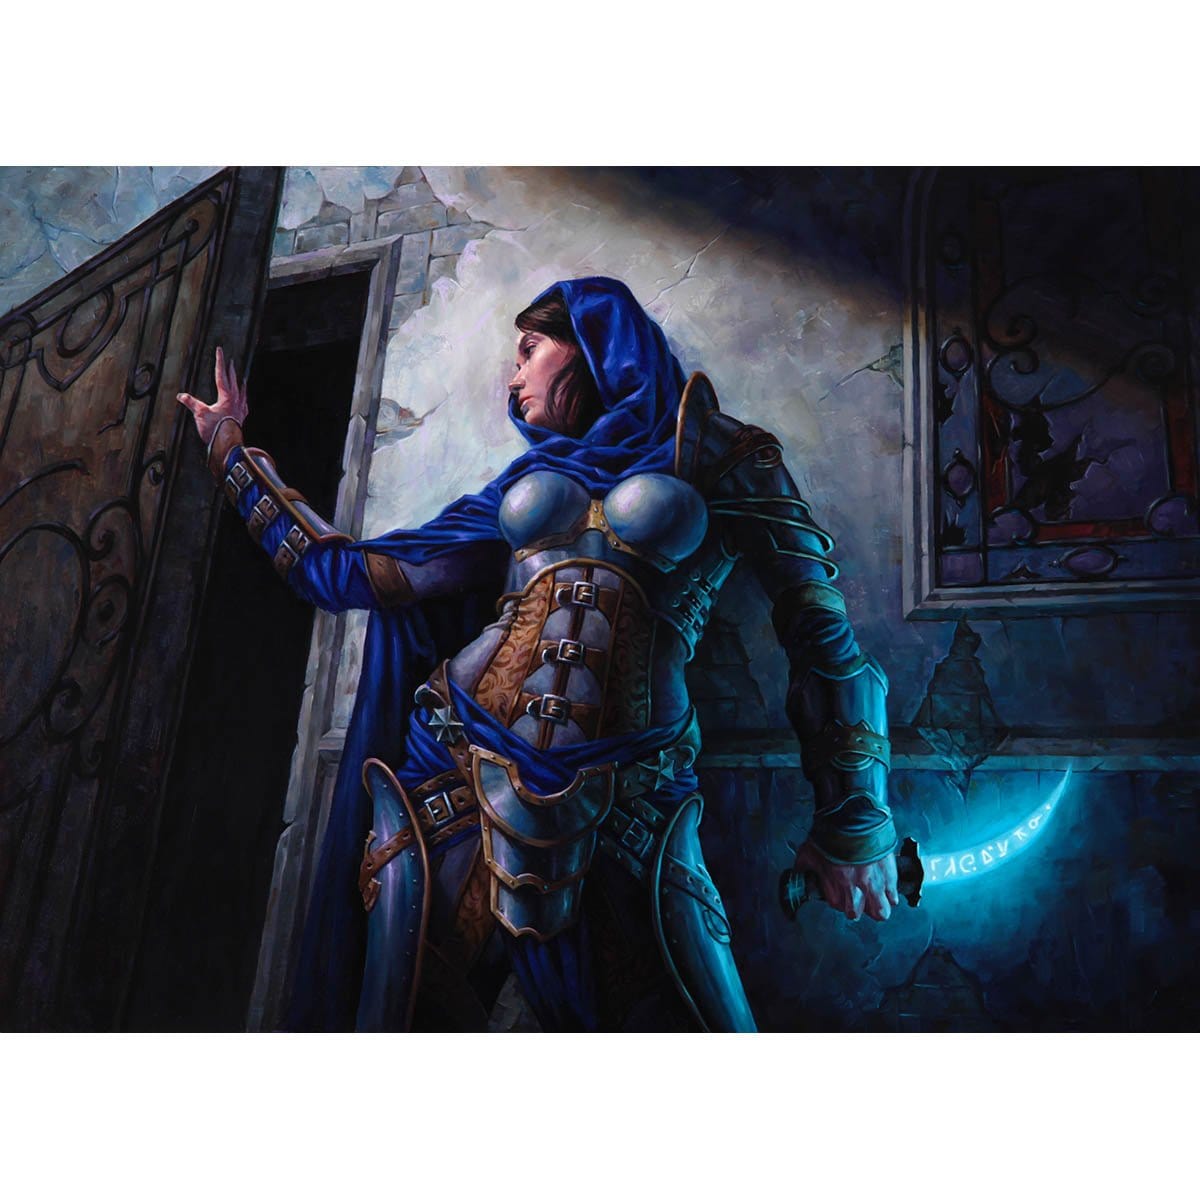 Stealer of Secrets Print - Print - Original Magic Art - Accessories for Magic the Gathering and other card games